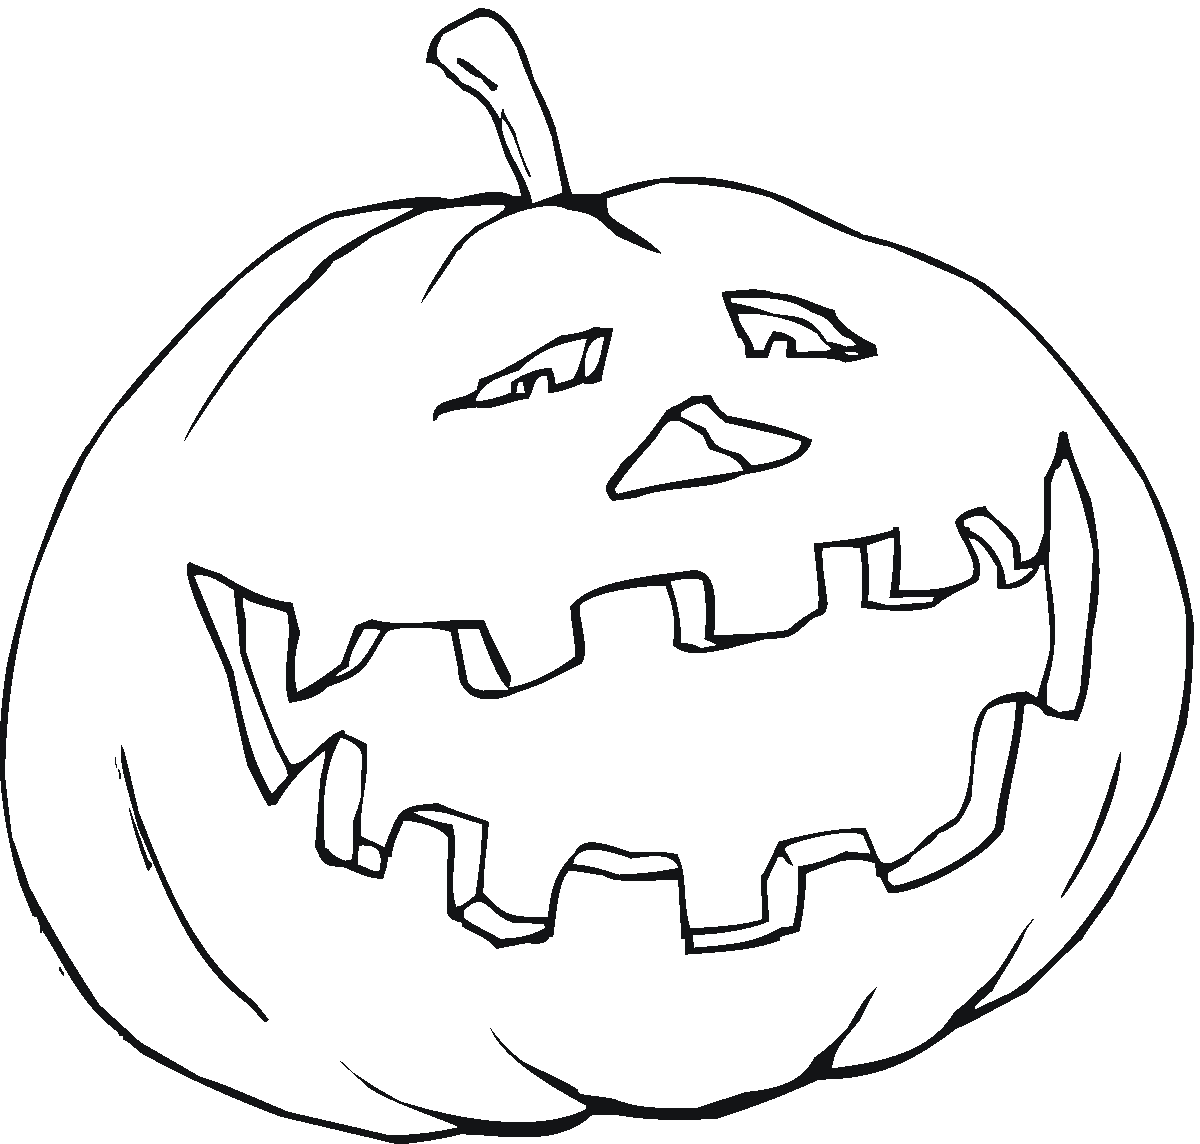 printable pumpkin pictures free printable pumpkin coloring pages for kids cool2bkids pumpkin printable pictures 